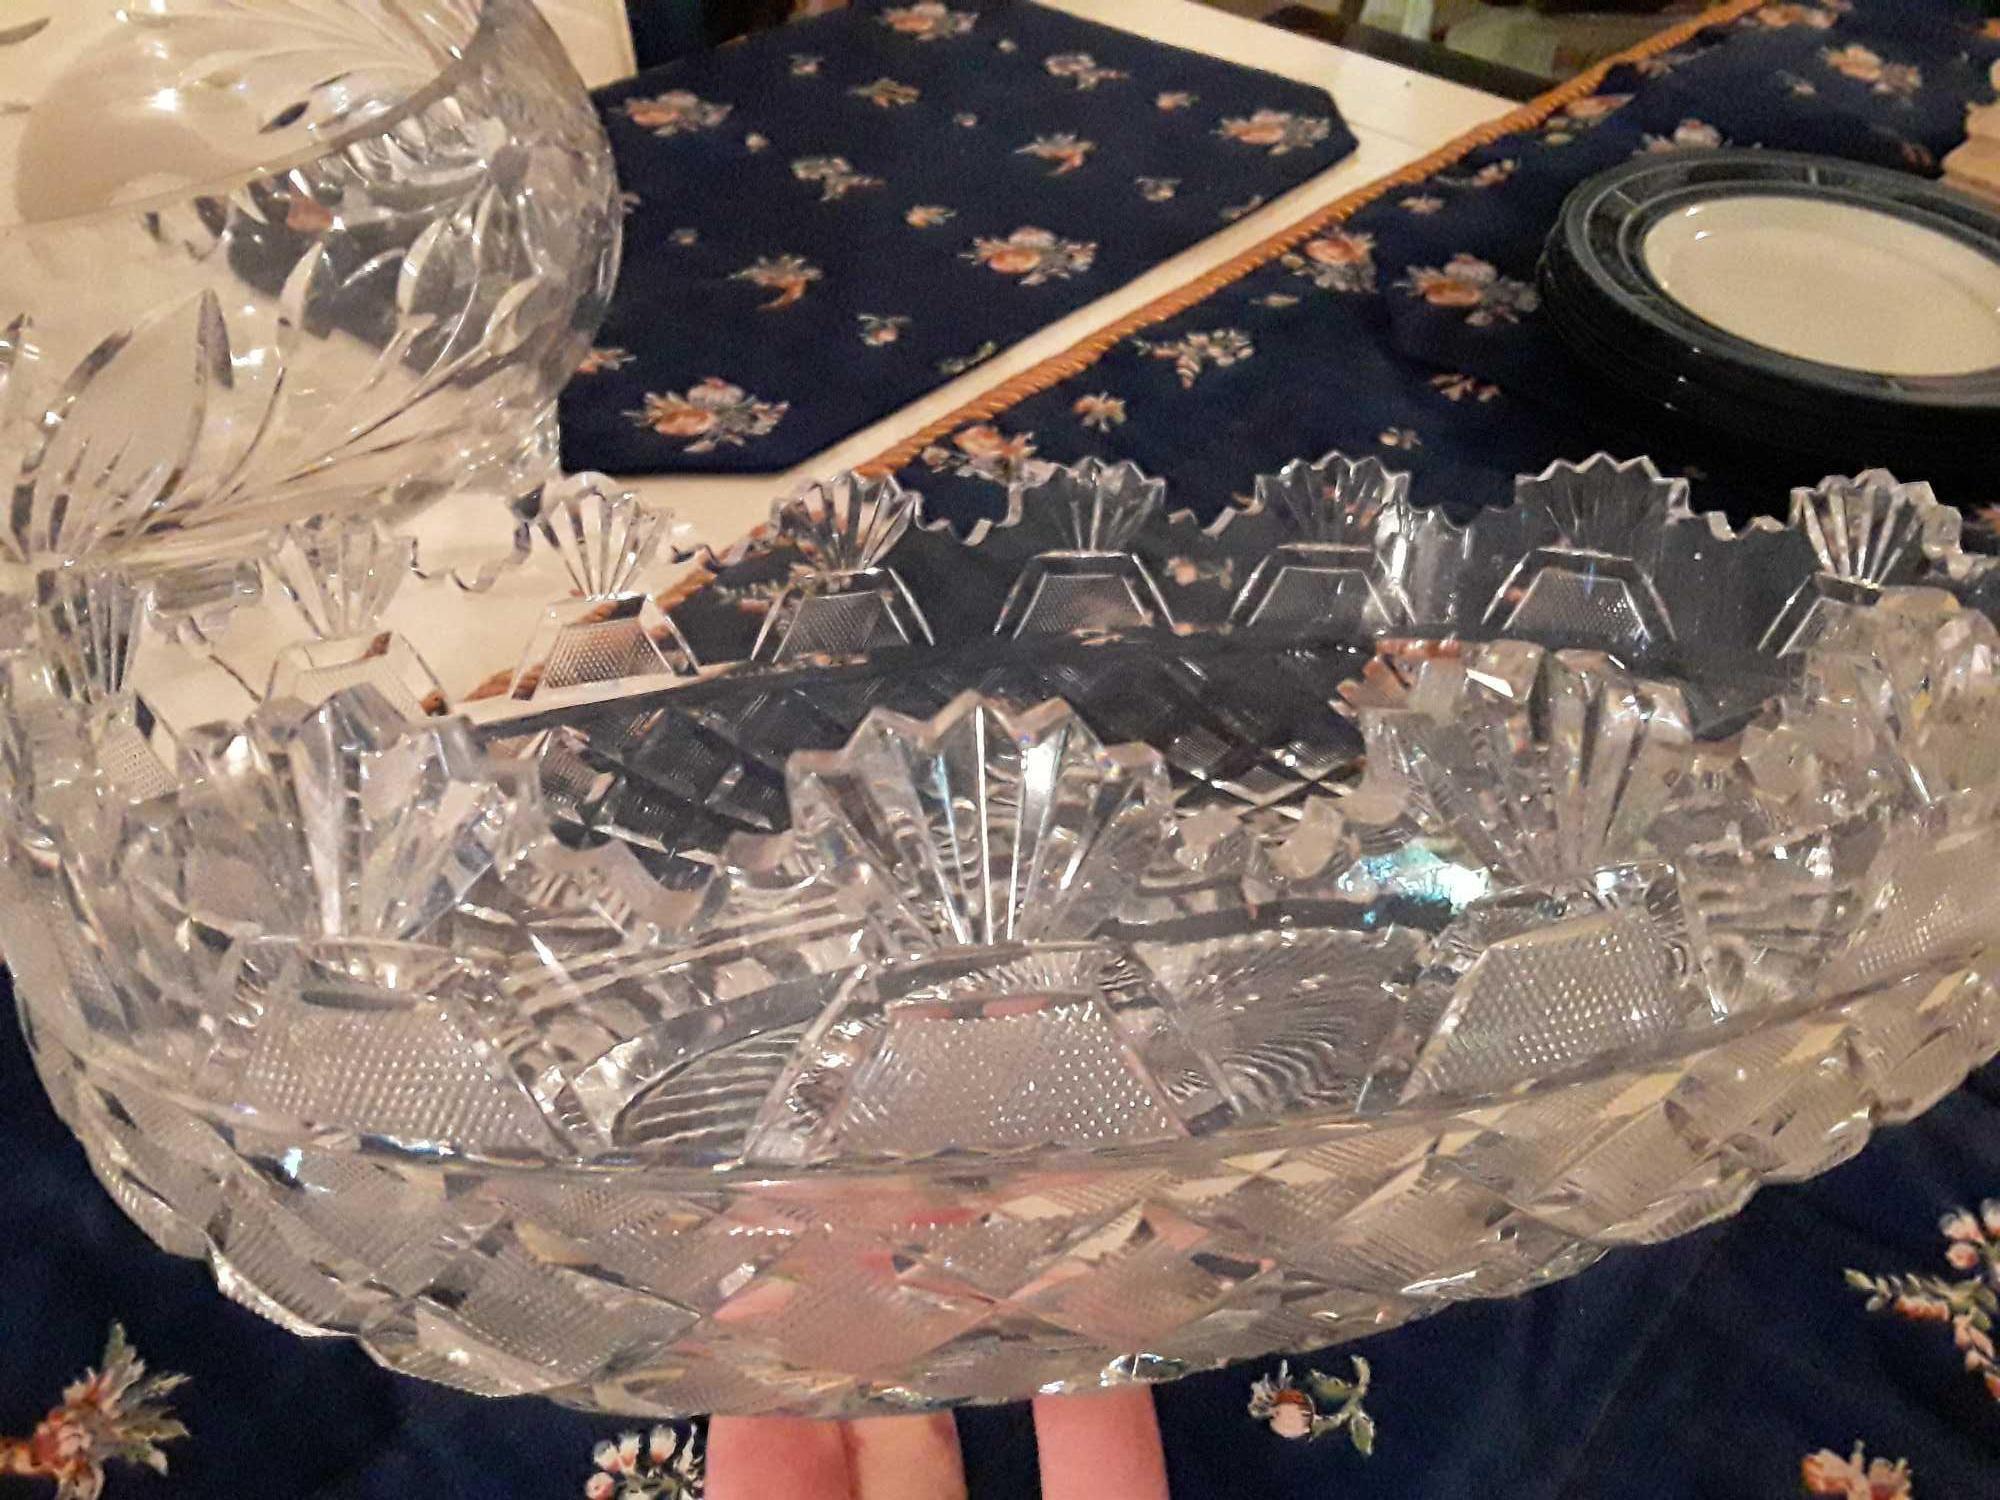 Seriously Dazzling Footed Crystal Bowl!